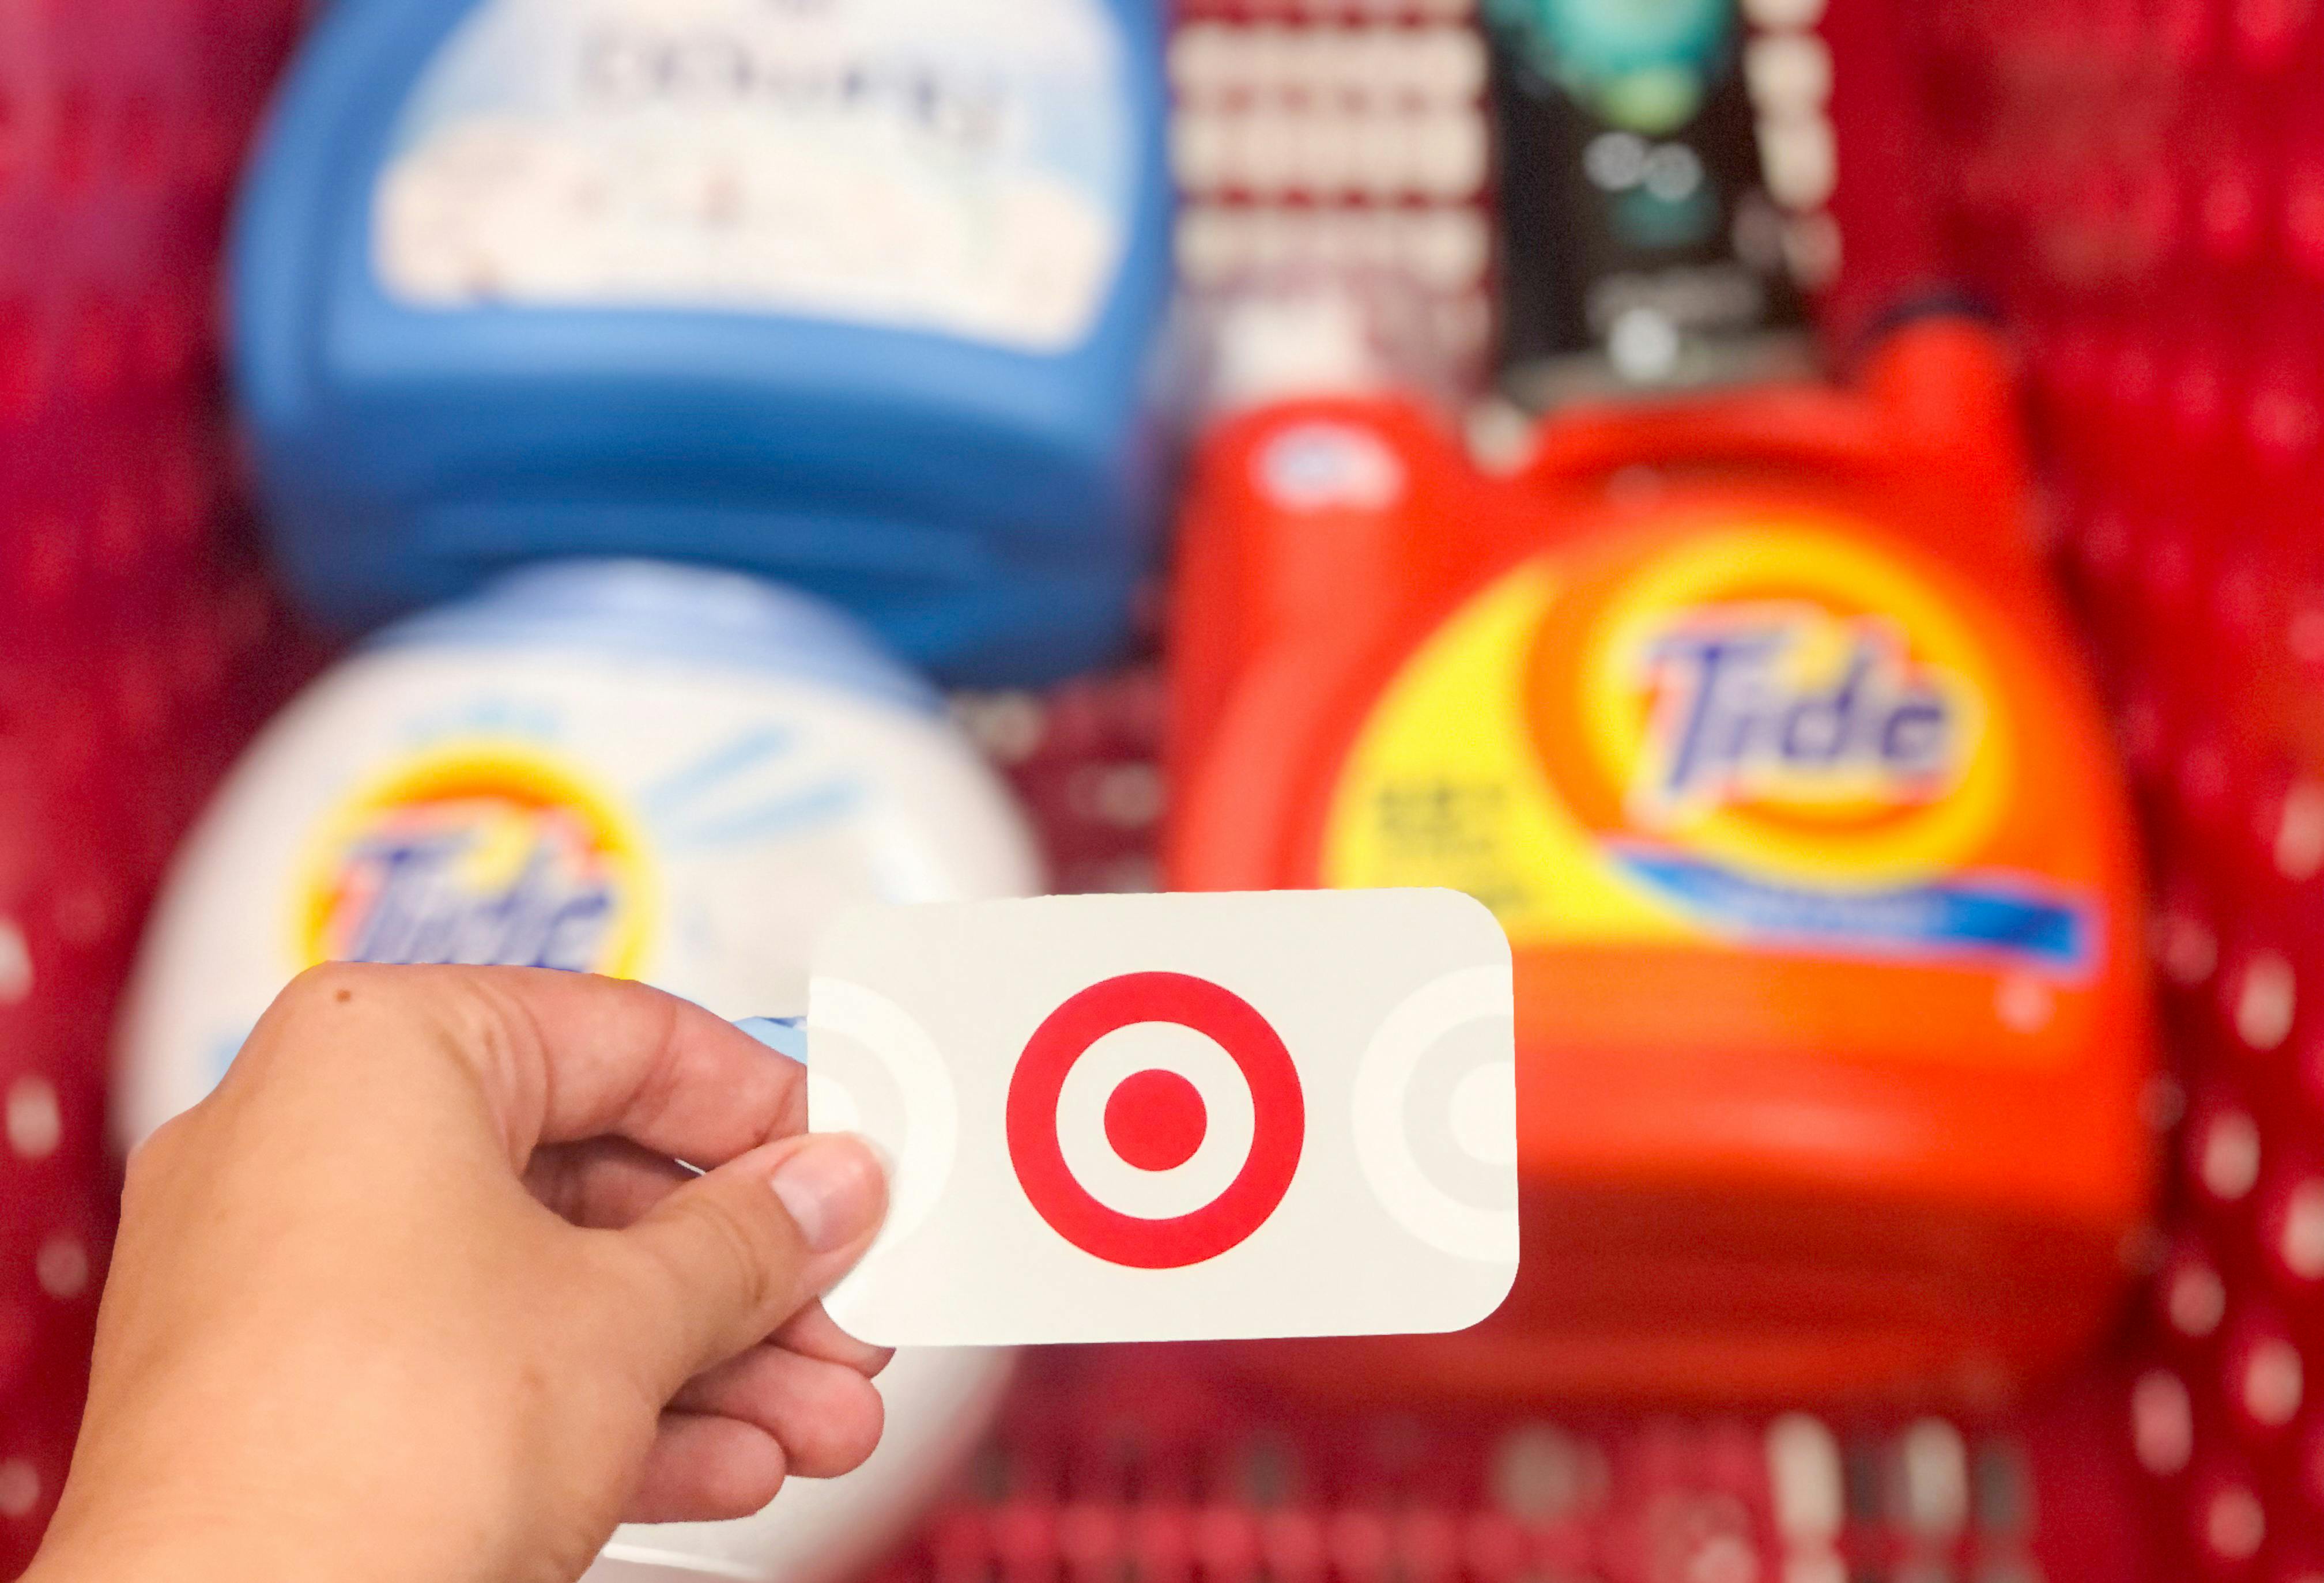 earn free gift cards - A person holding gift card over the top of a shopping cart that has bottles of laundry detergent